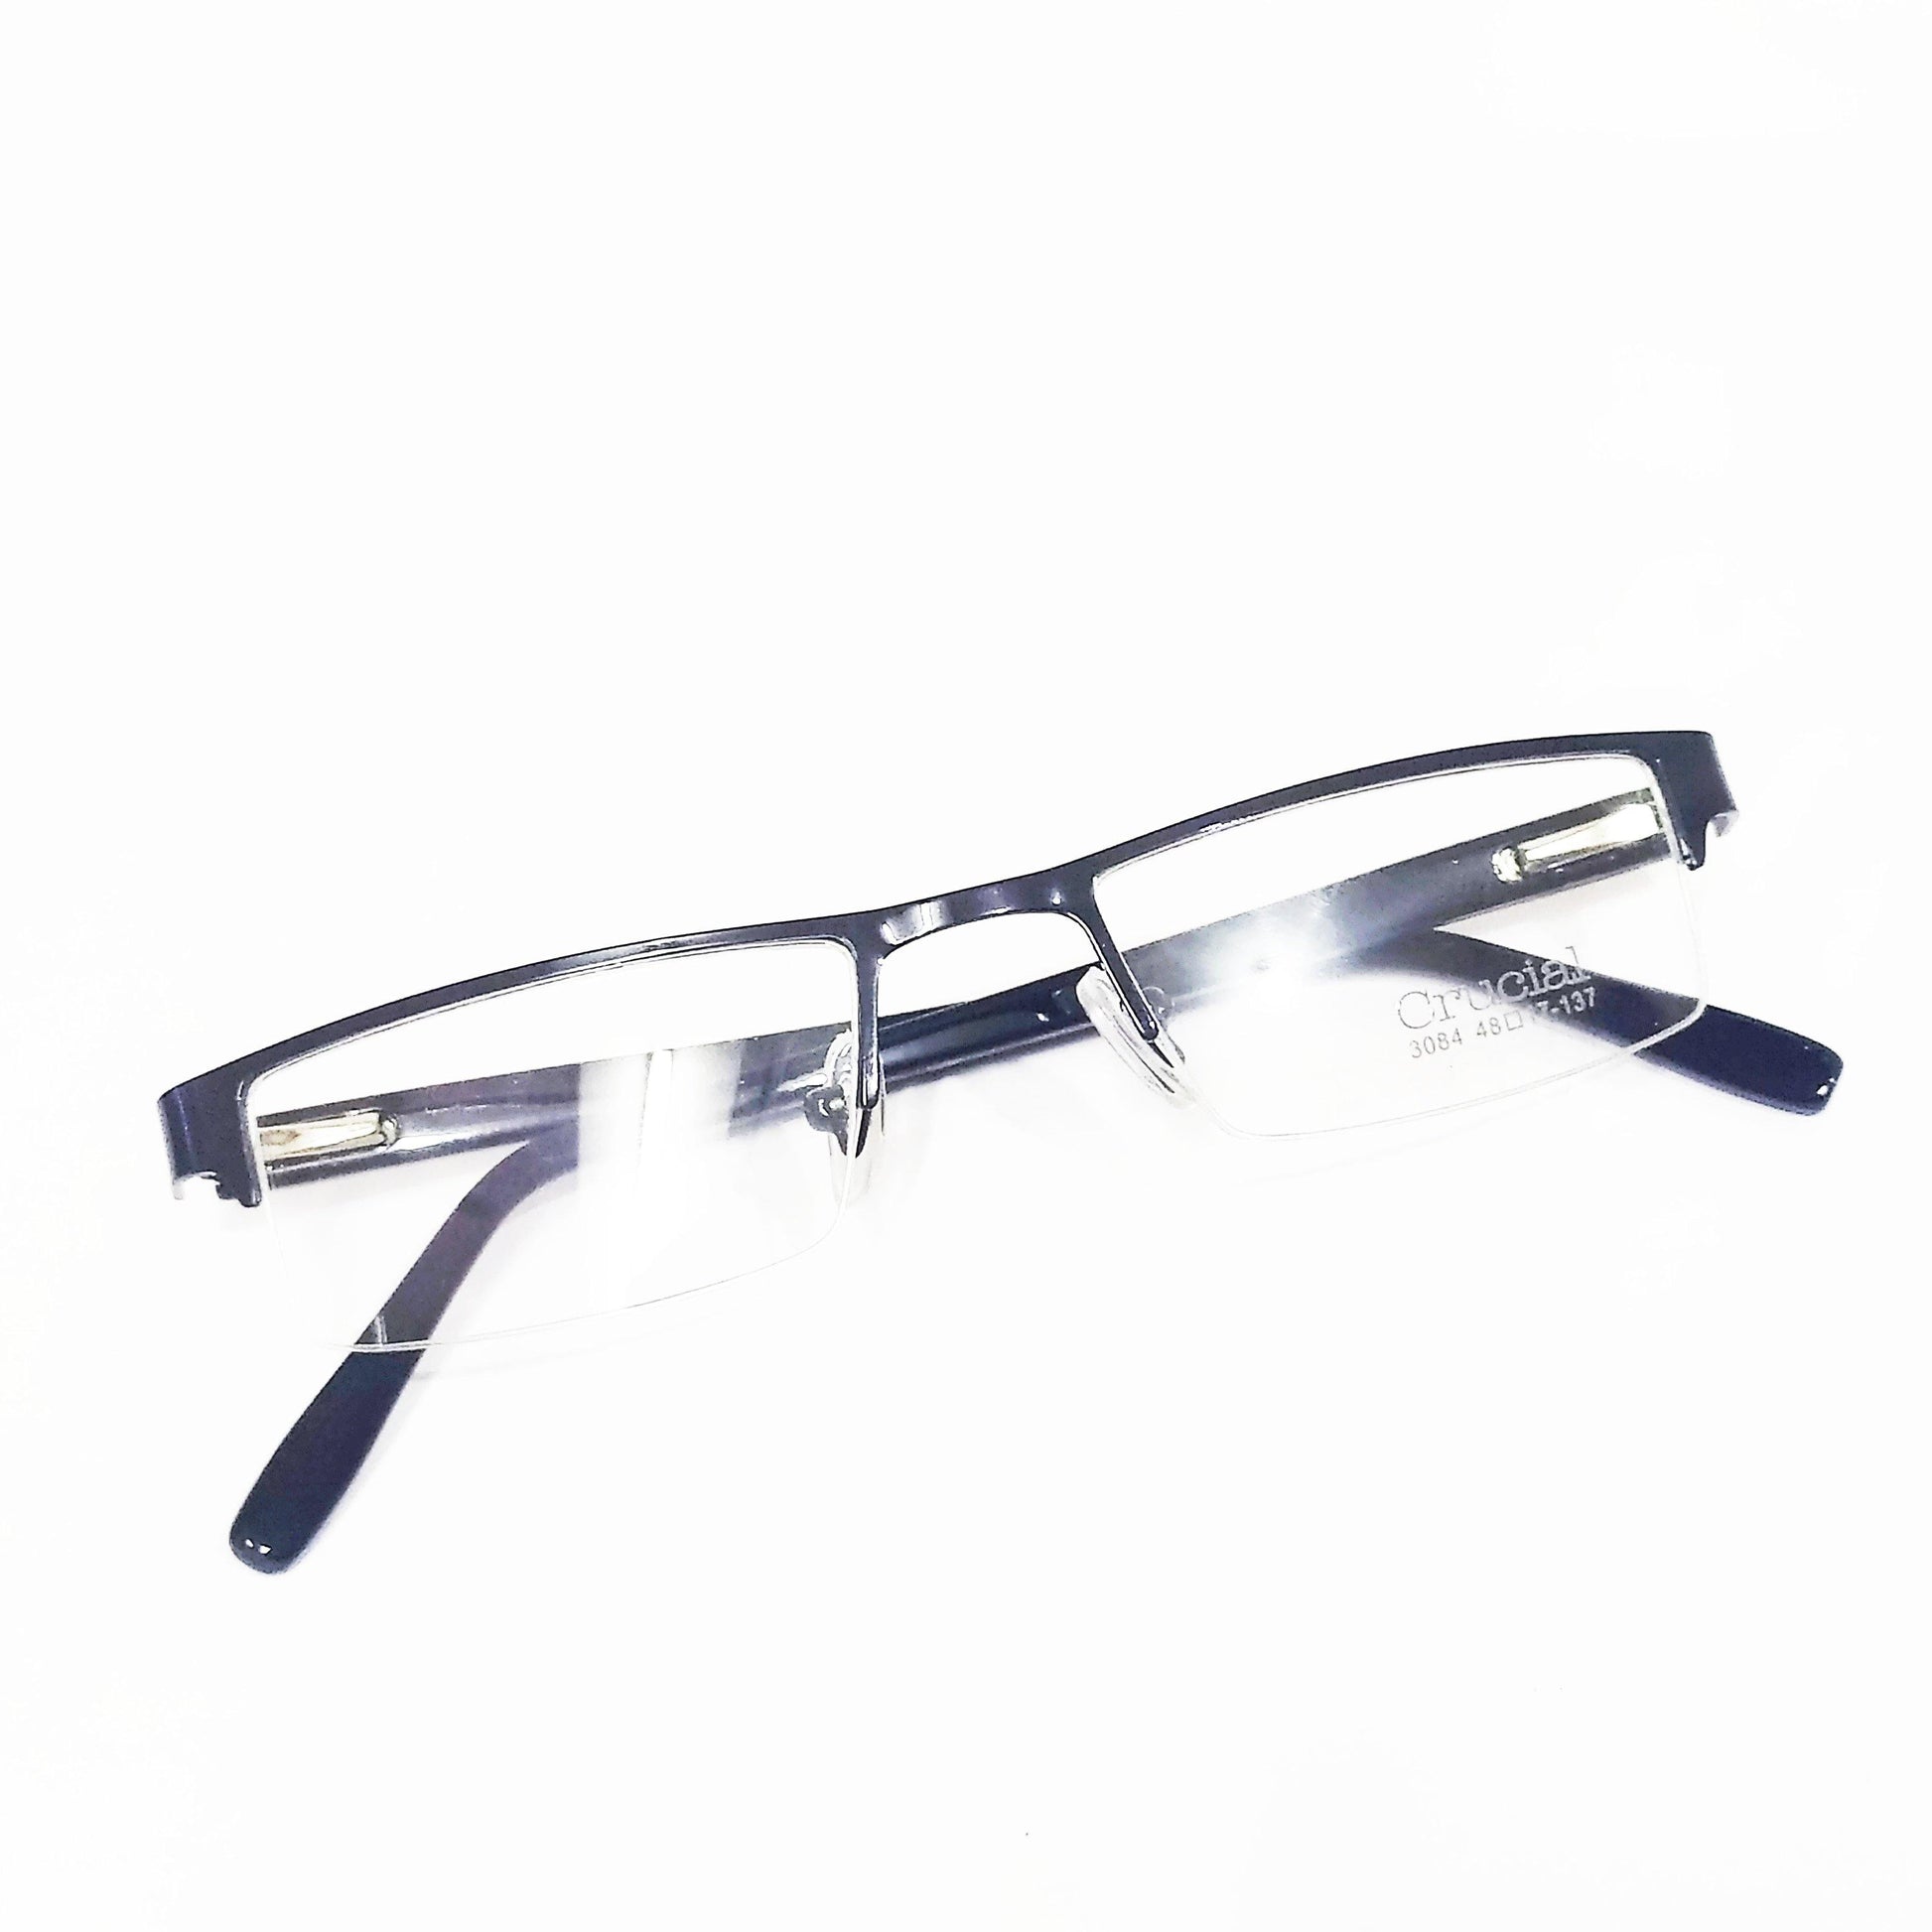 Buy Black Metal Supra Spectacle Frame Glasses For Women and Men - Glasses India Online in India